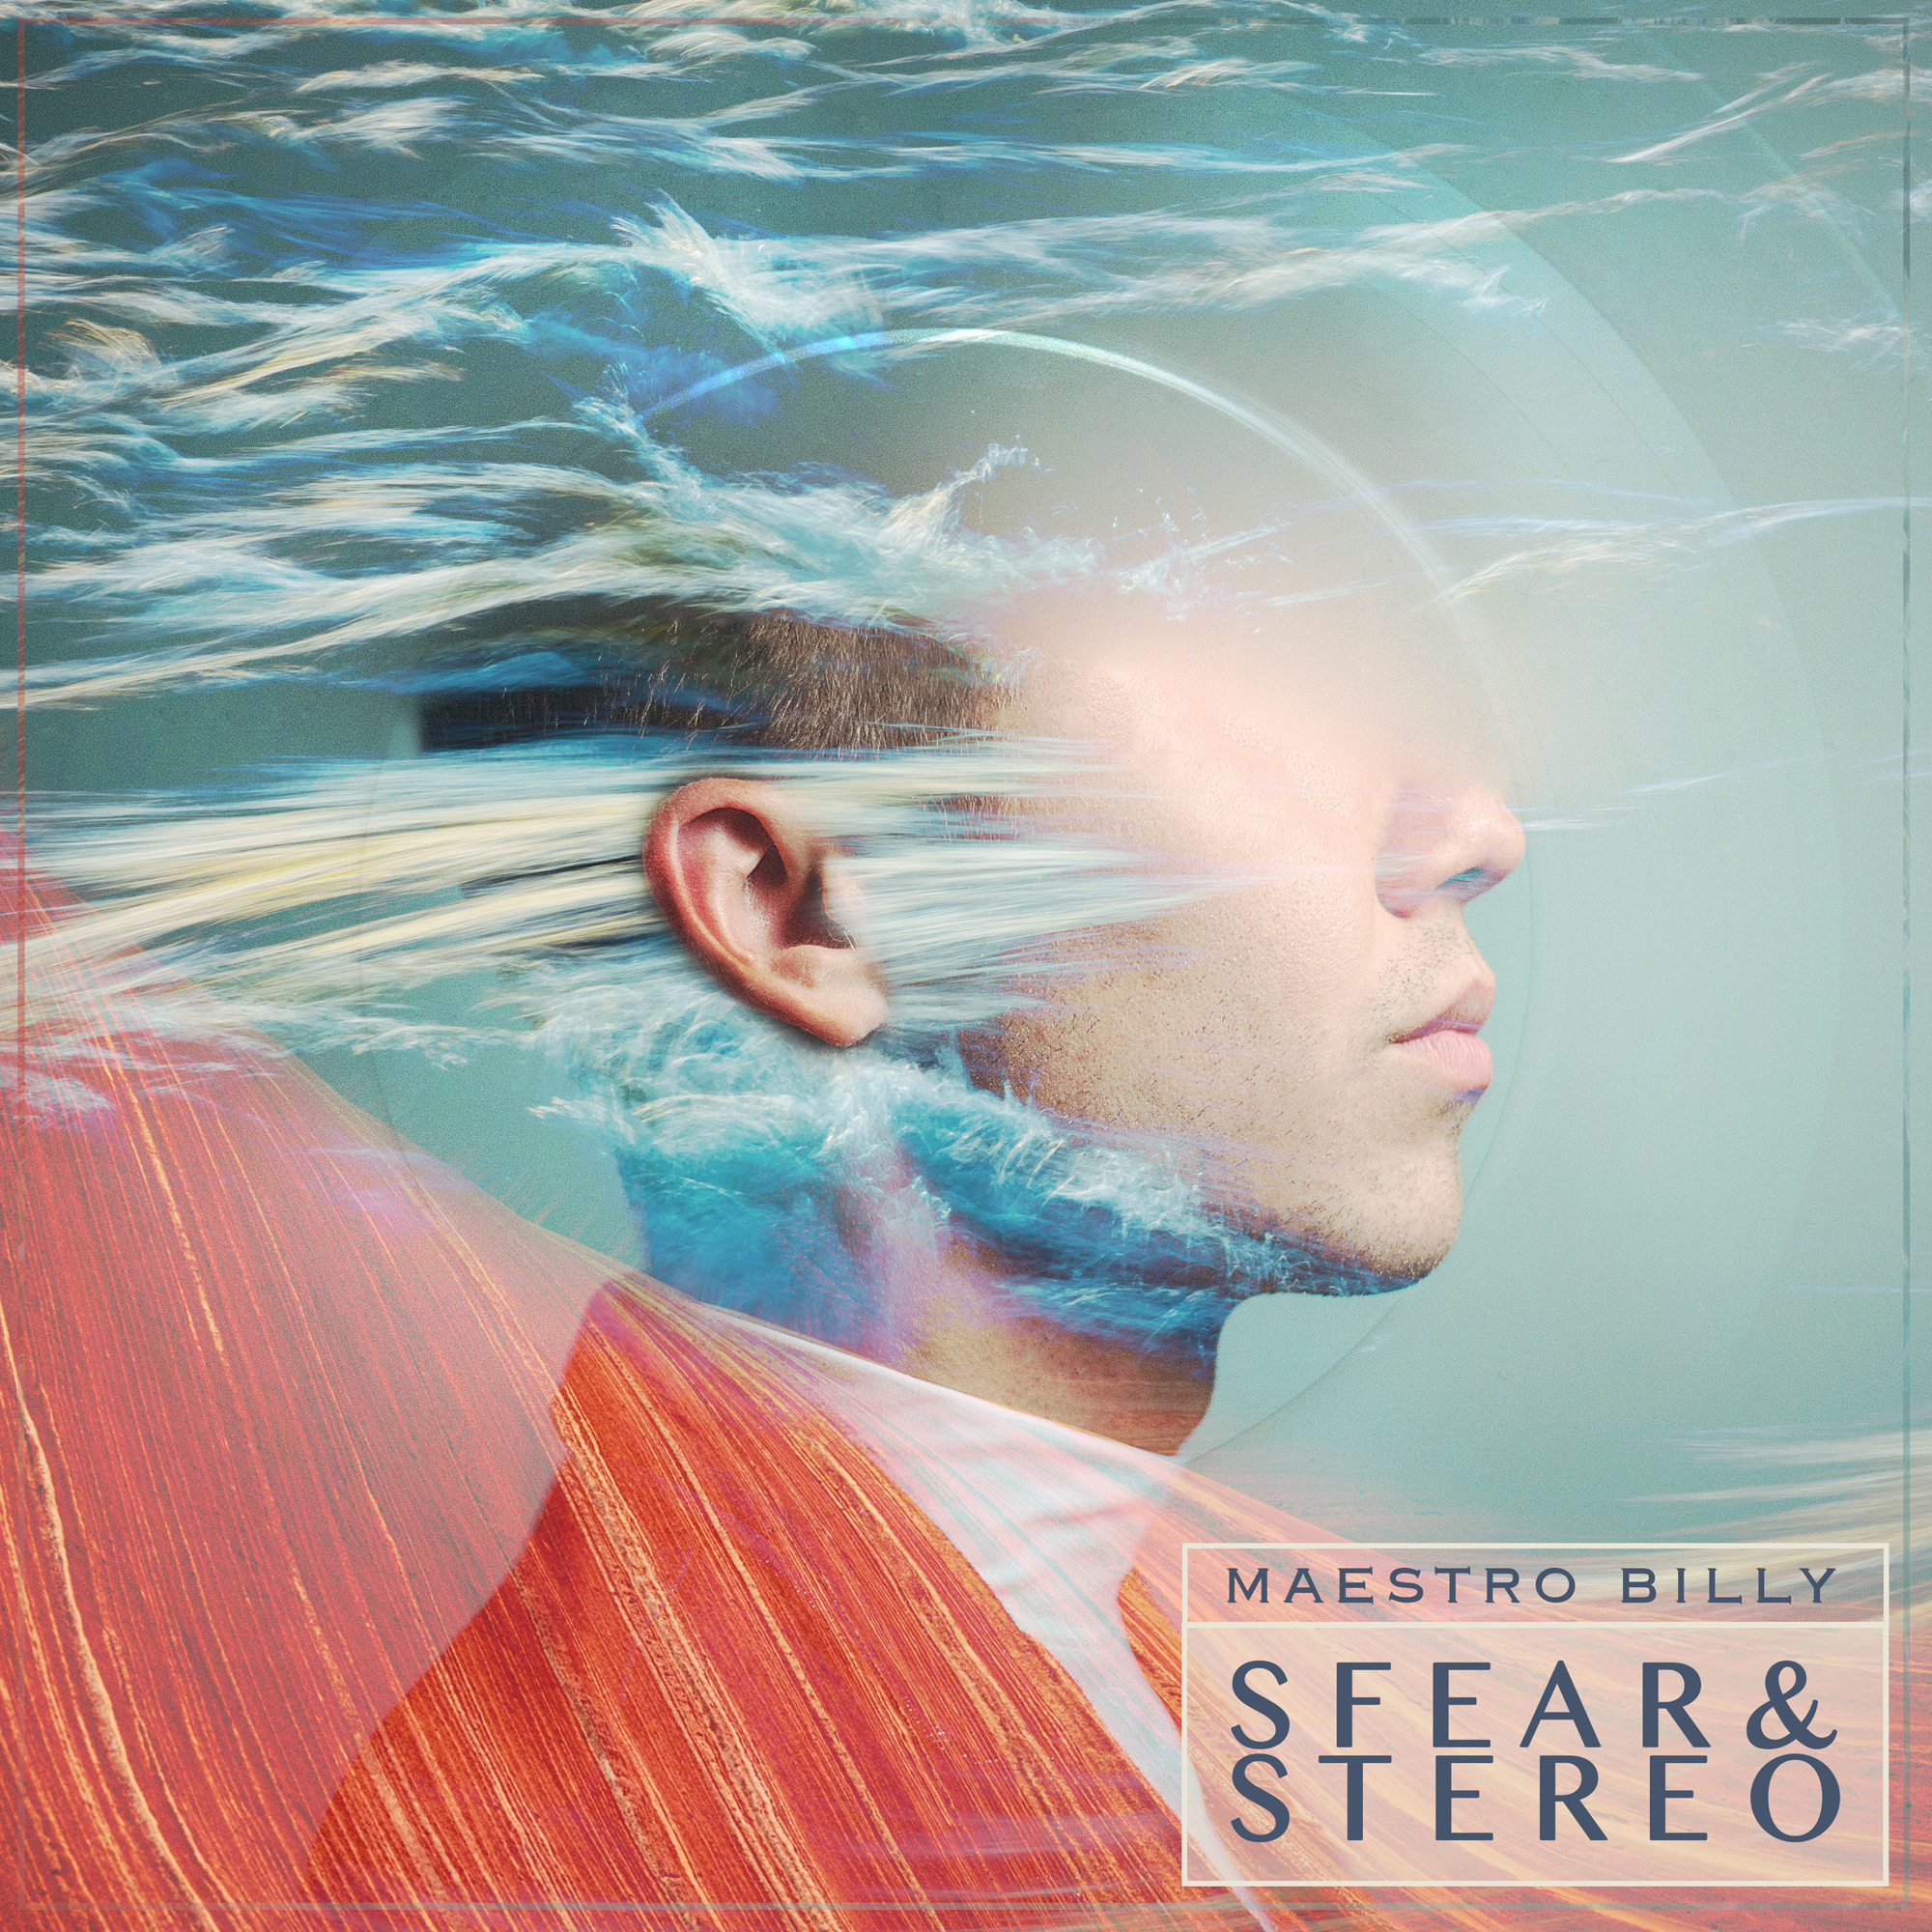 Sfear & Stereo – A new album with Spatial Audio.